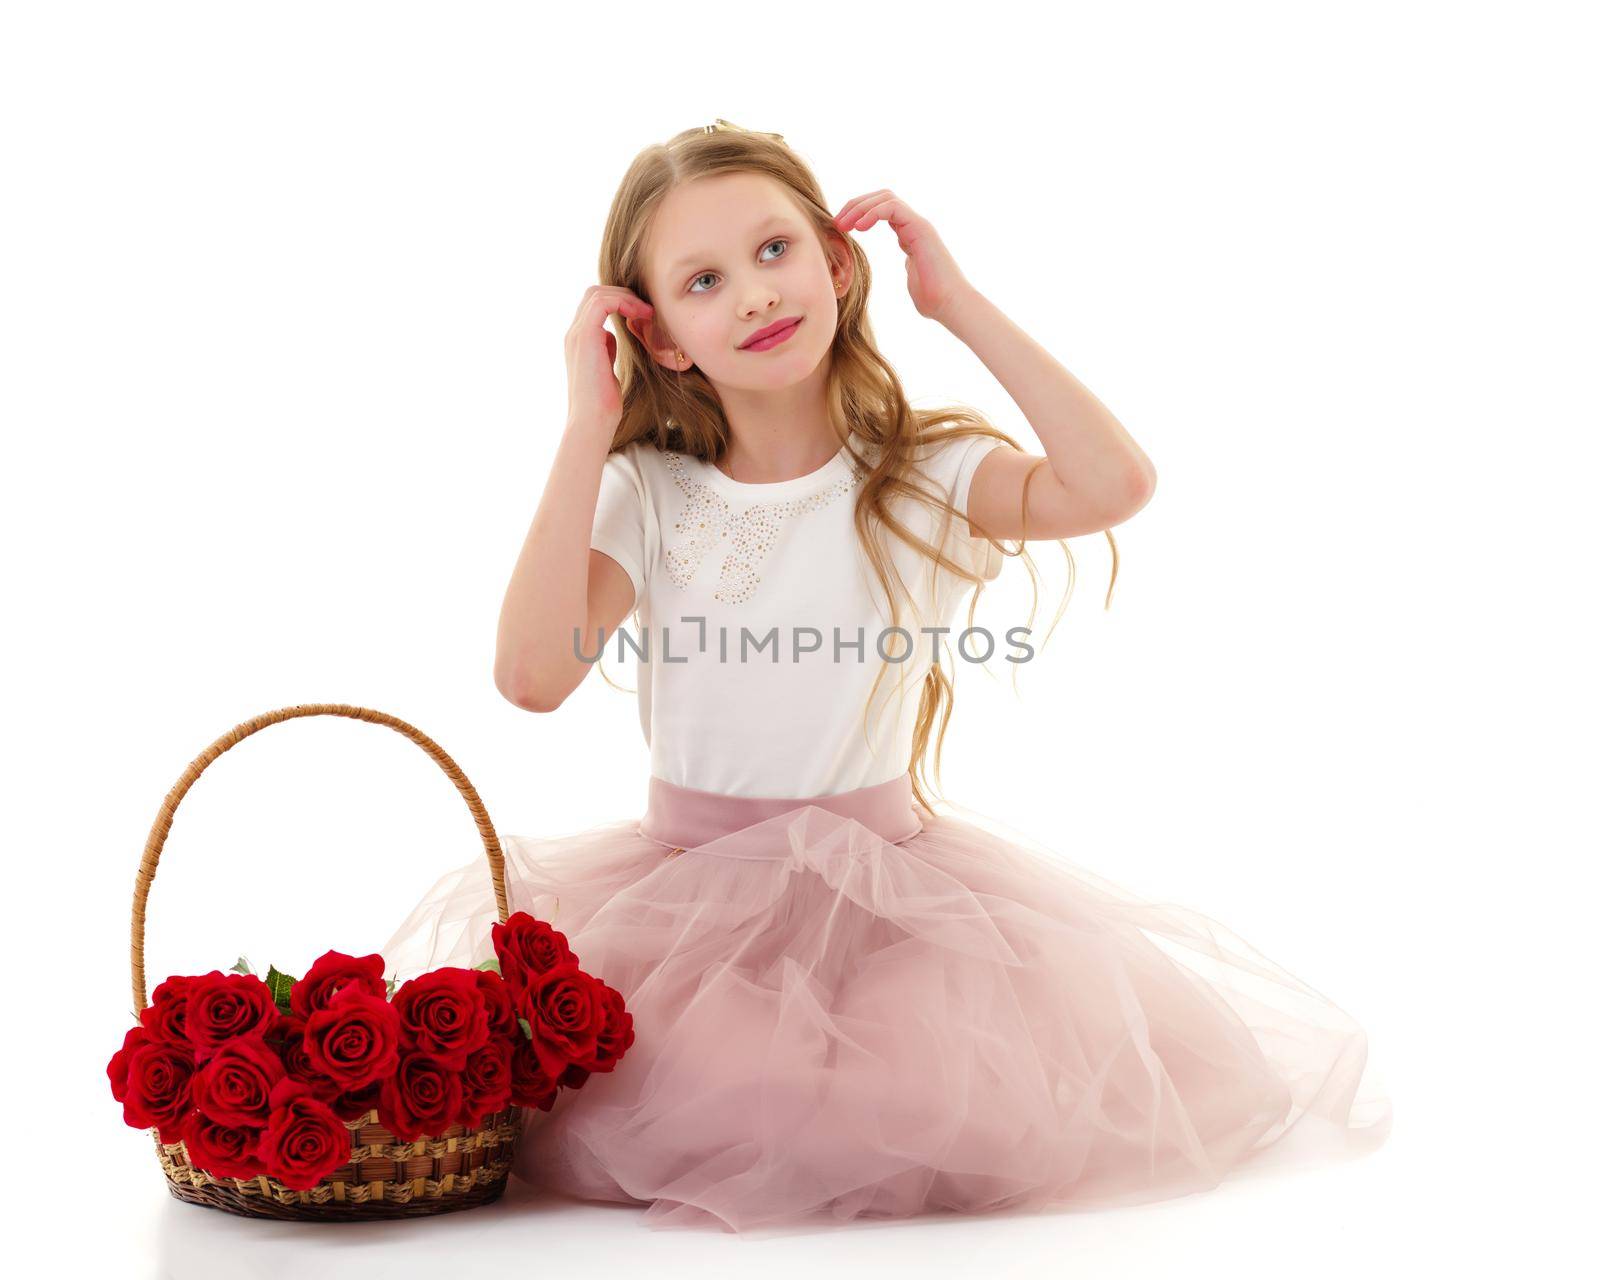 Charming little girl with a basket of flowers. Concept of holiday, summer mood. Isolated on white background.